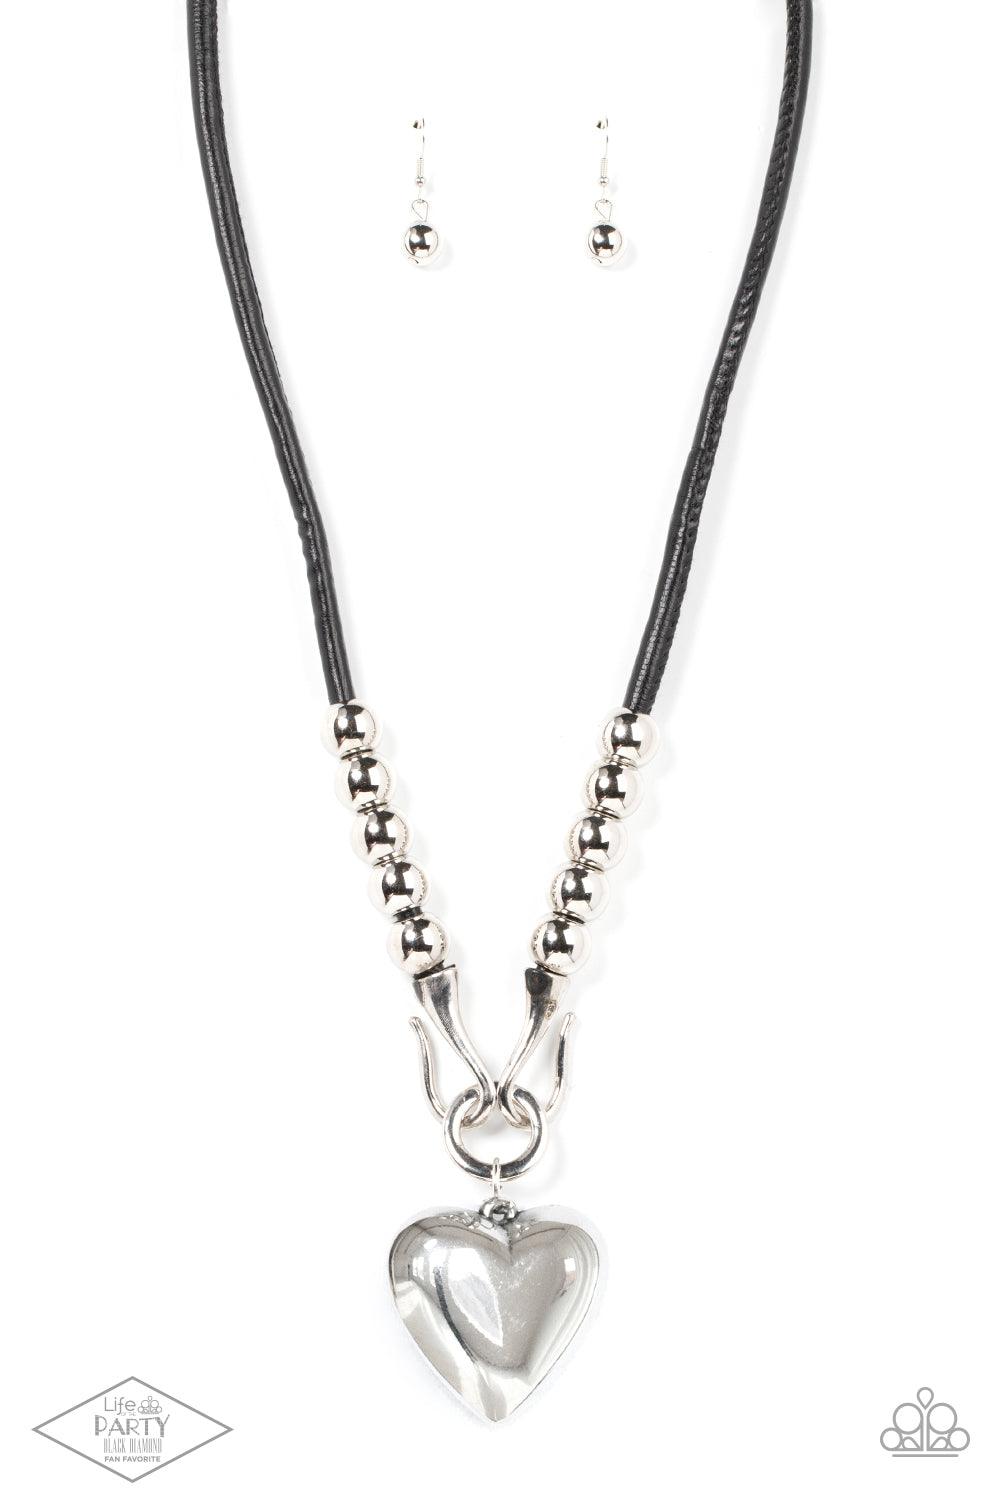 Paparazzi Accessories Forbidden Love - Black Featuring chunky silver beads, an oversized silver heart pendant swings from dramatic silver hook-like fittings that attach to a bold leather cord draped across the chest for a haute heartbreaker look. Features